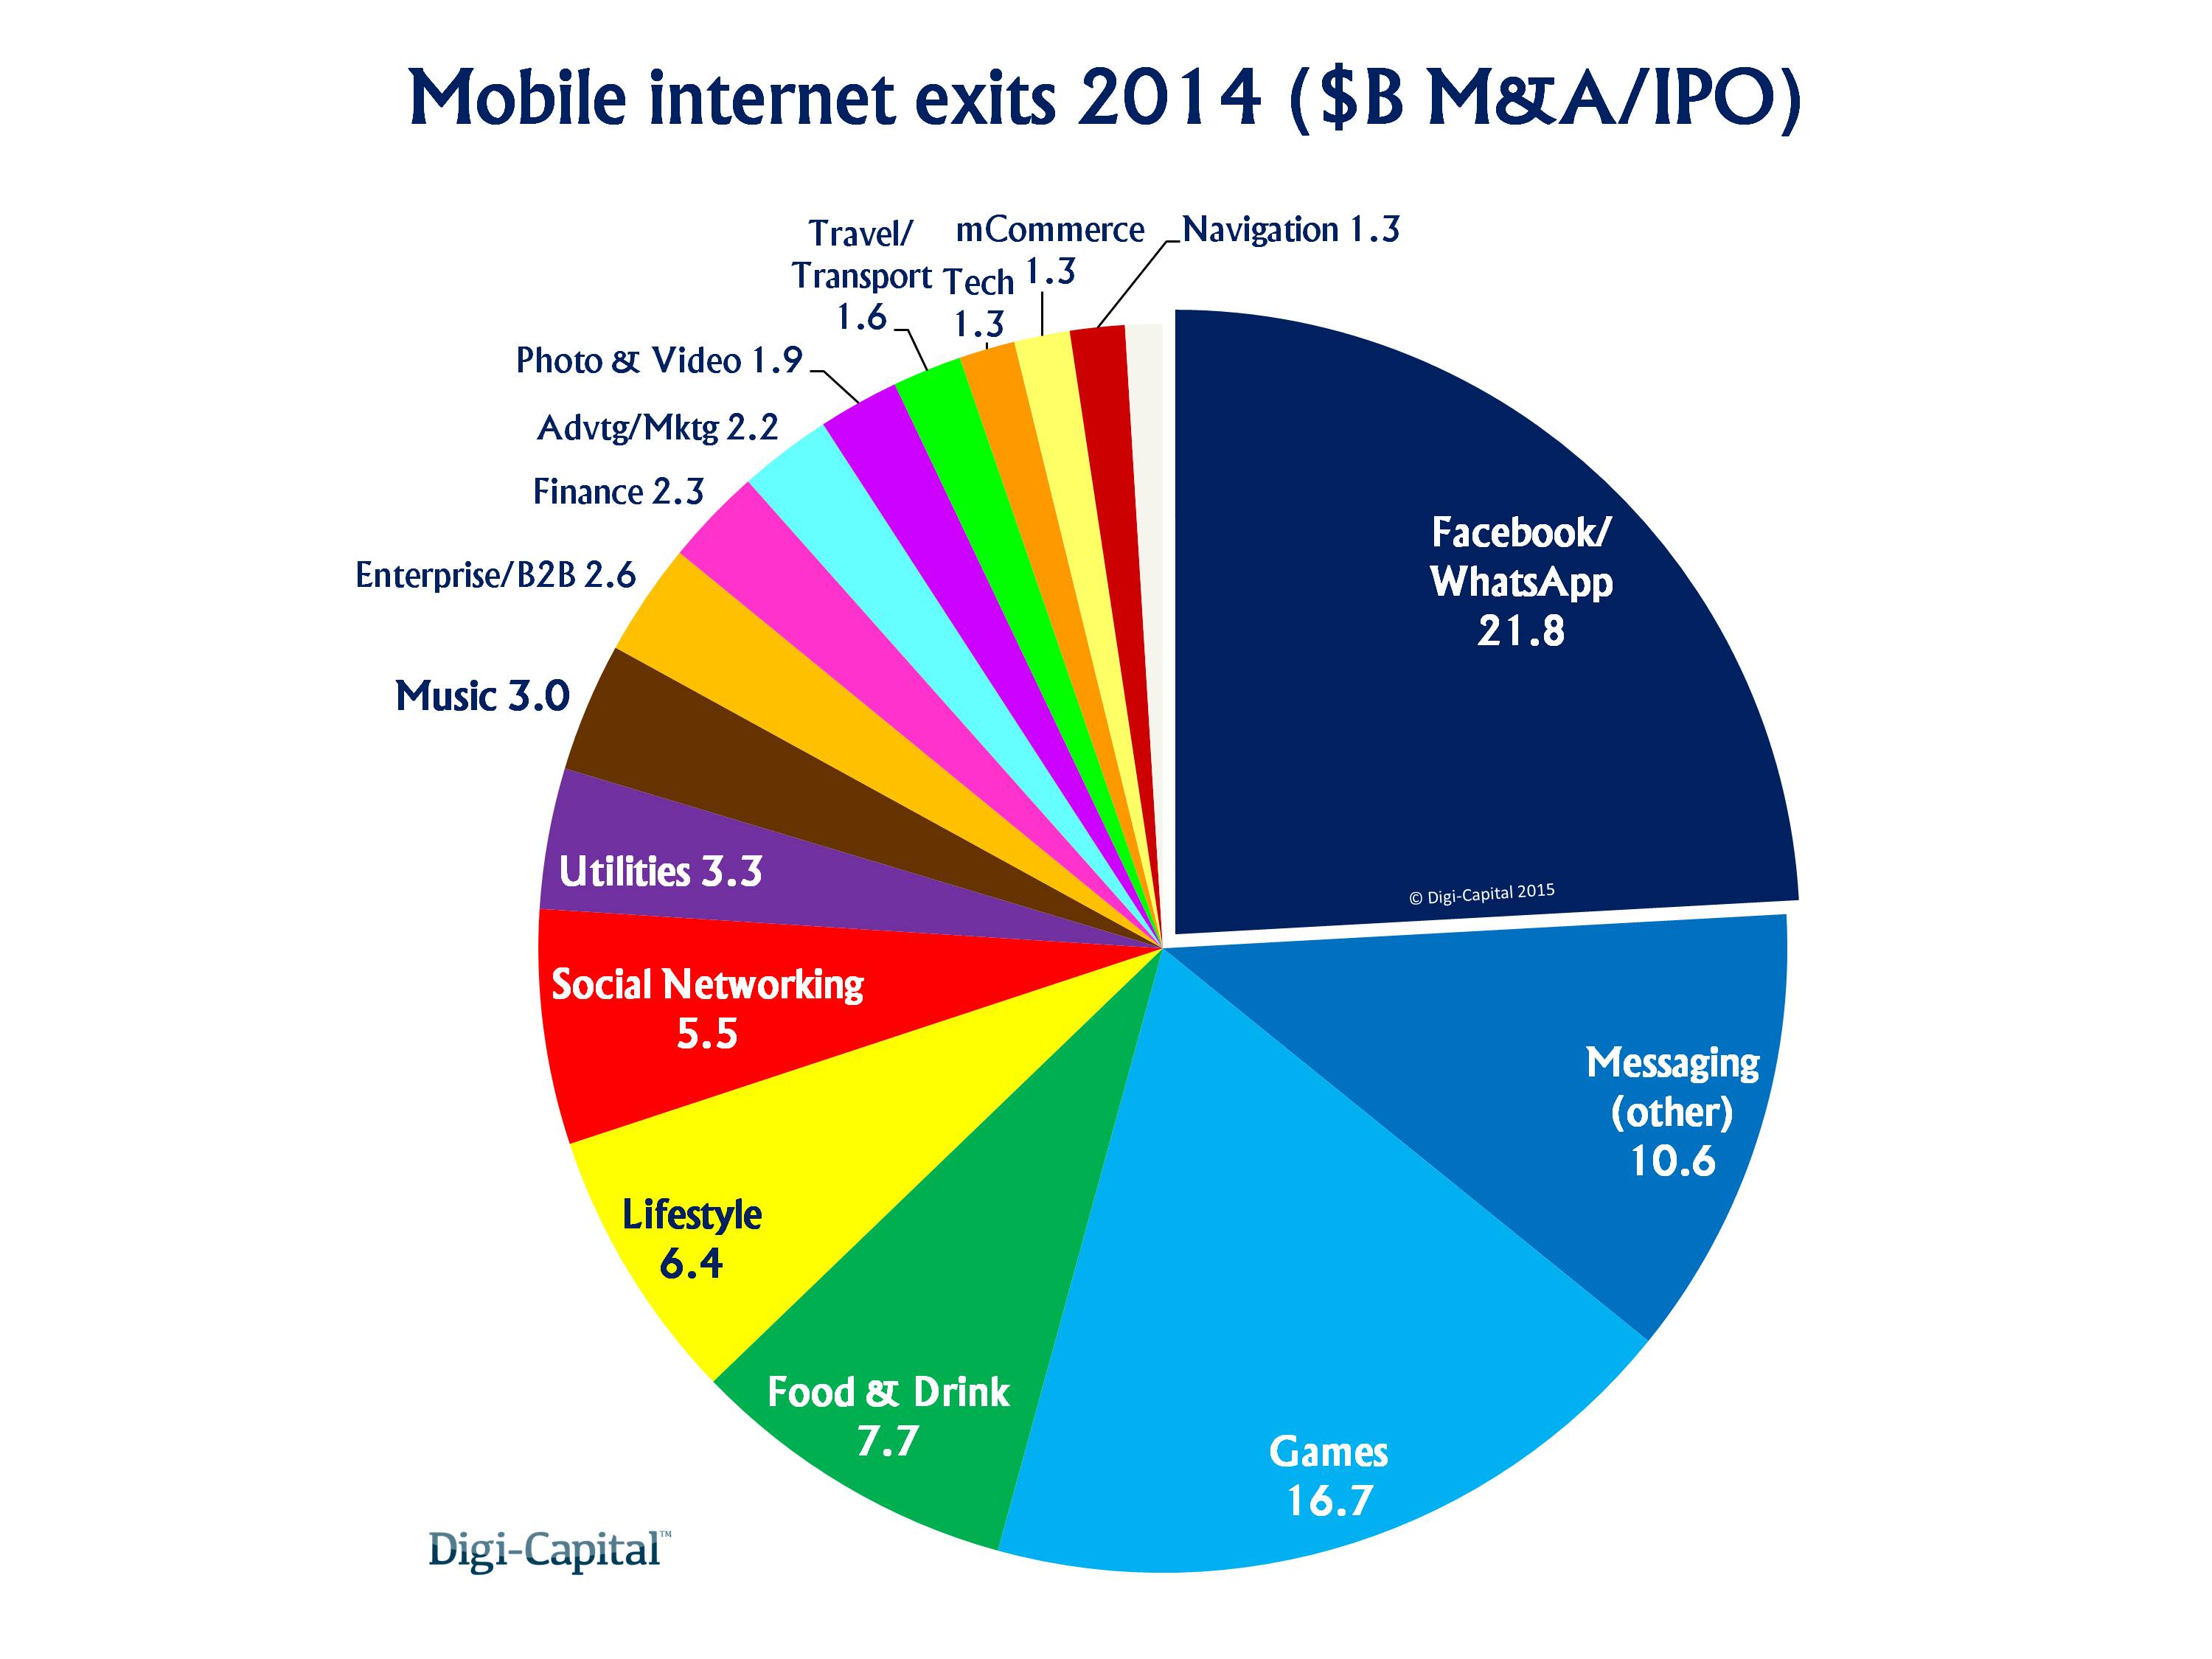 Mobile internet sector exits